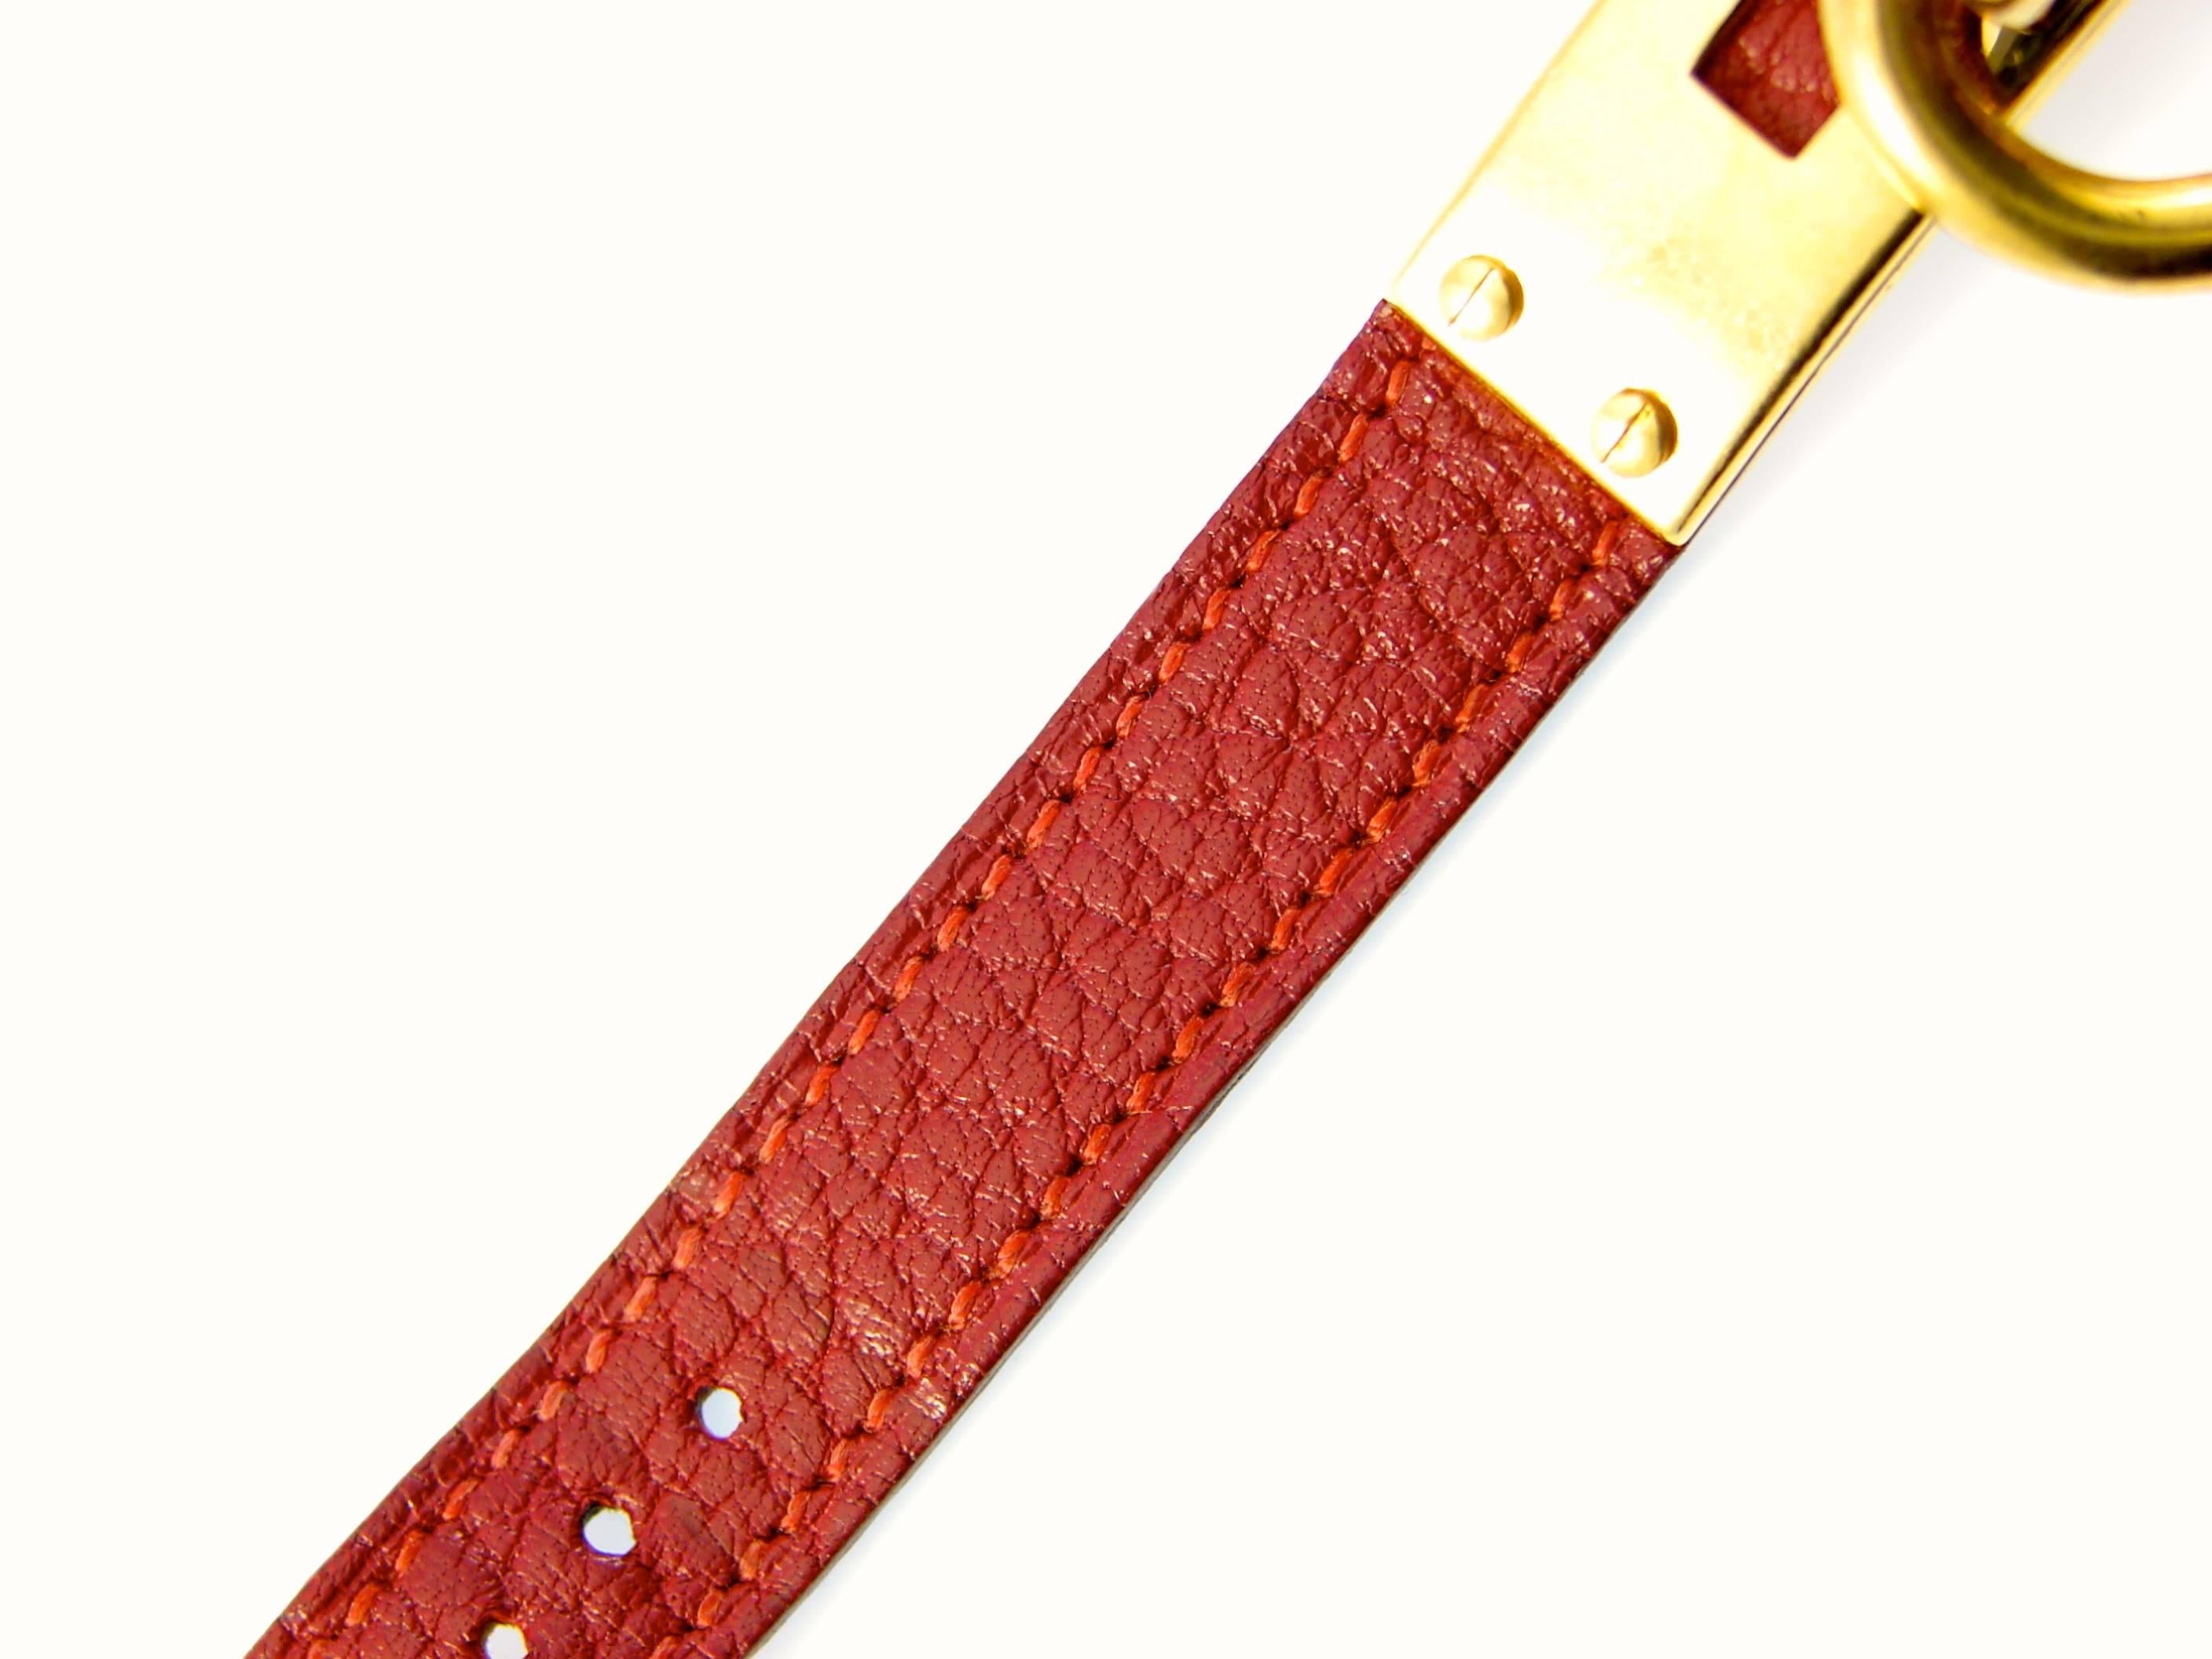 Contemporary Elegant Hermes Paris Gold Kelly Watch with Red Face + Rouge H Leather Strap 90s